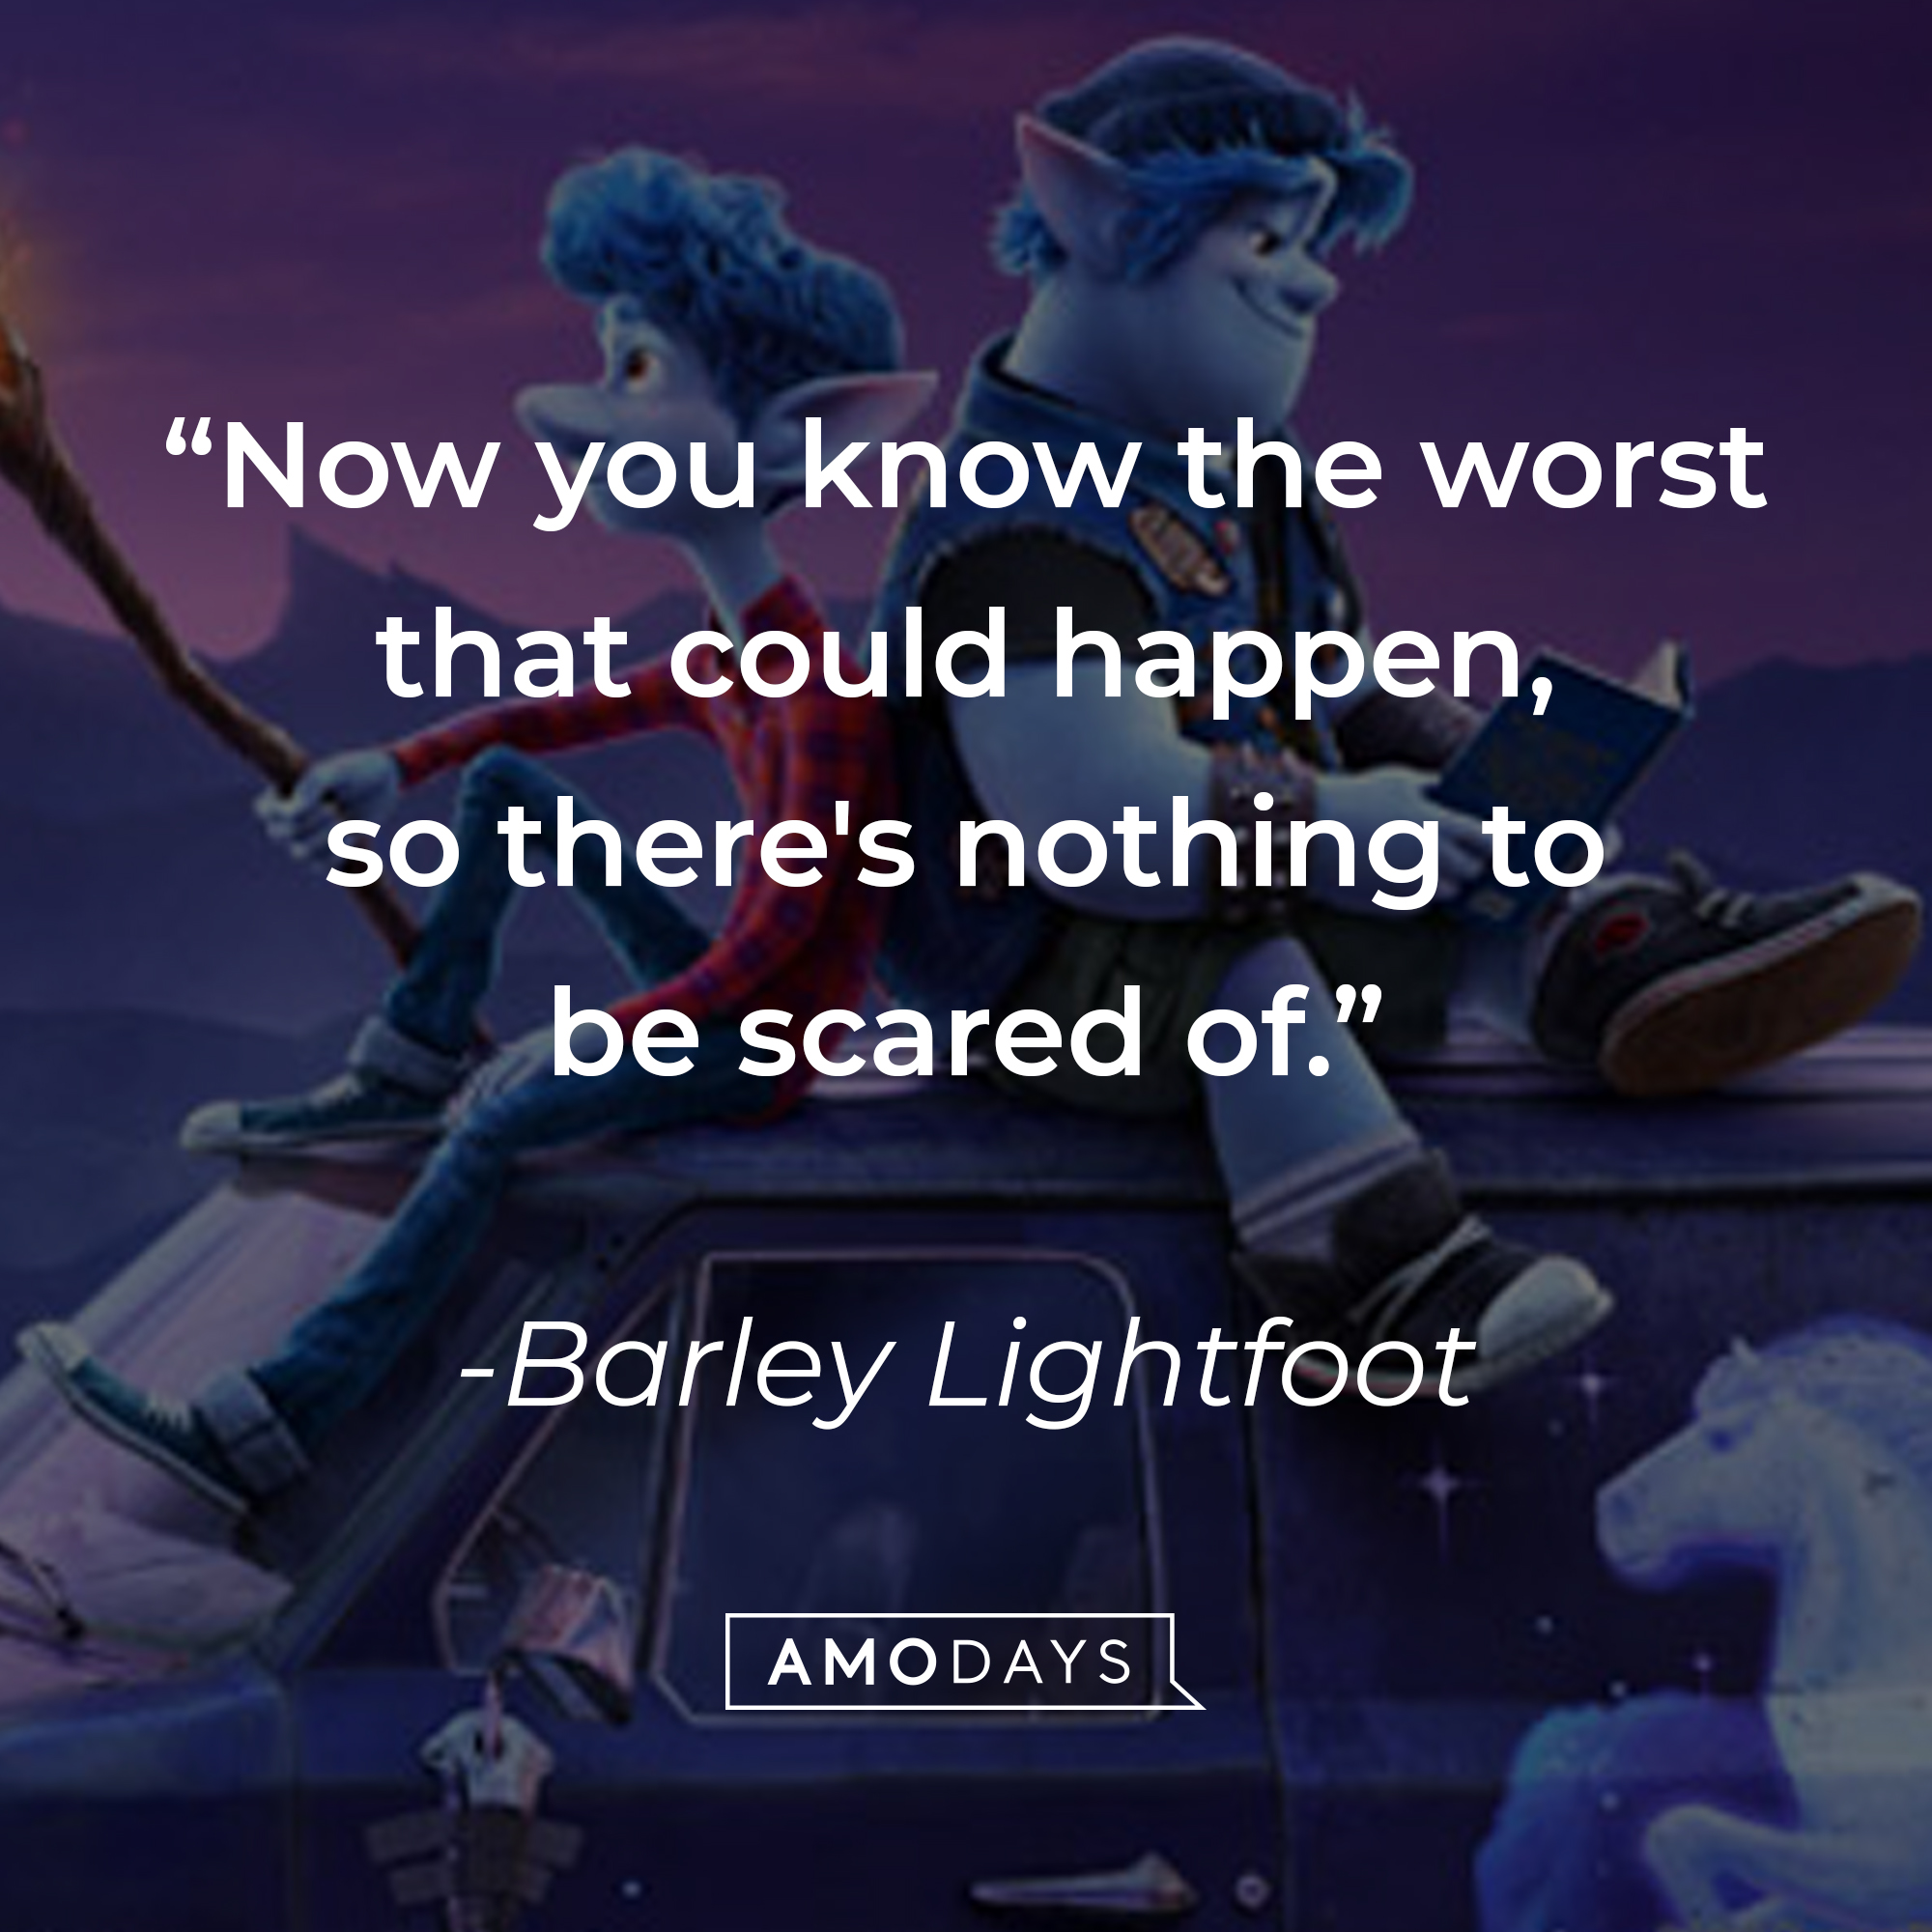 A still from Disney's "Onward" with Barley Lightfoot's quote: "Now you know the worst that could happen, so there's nothing to be scared of." | Source: facebook.com/pixaronward